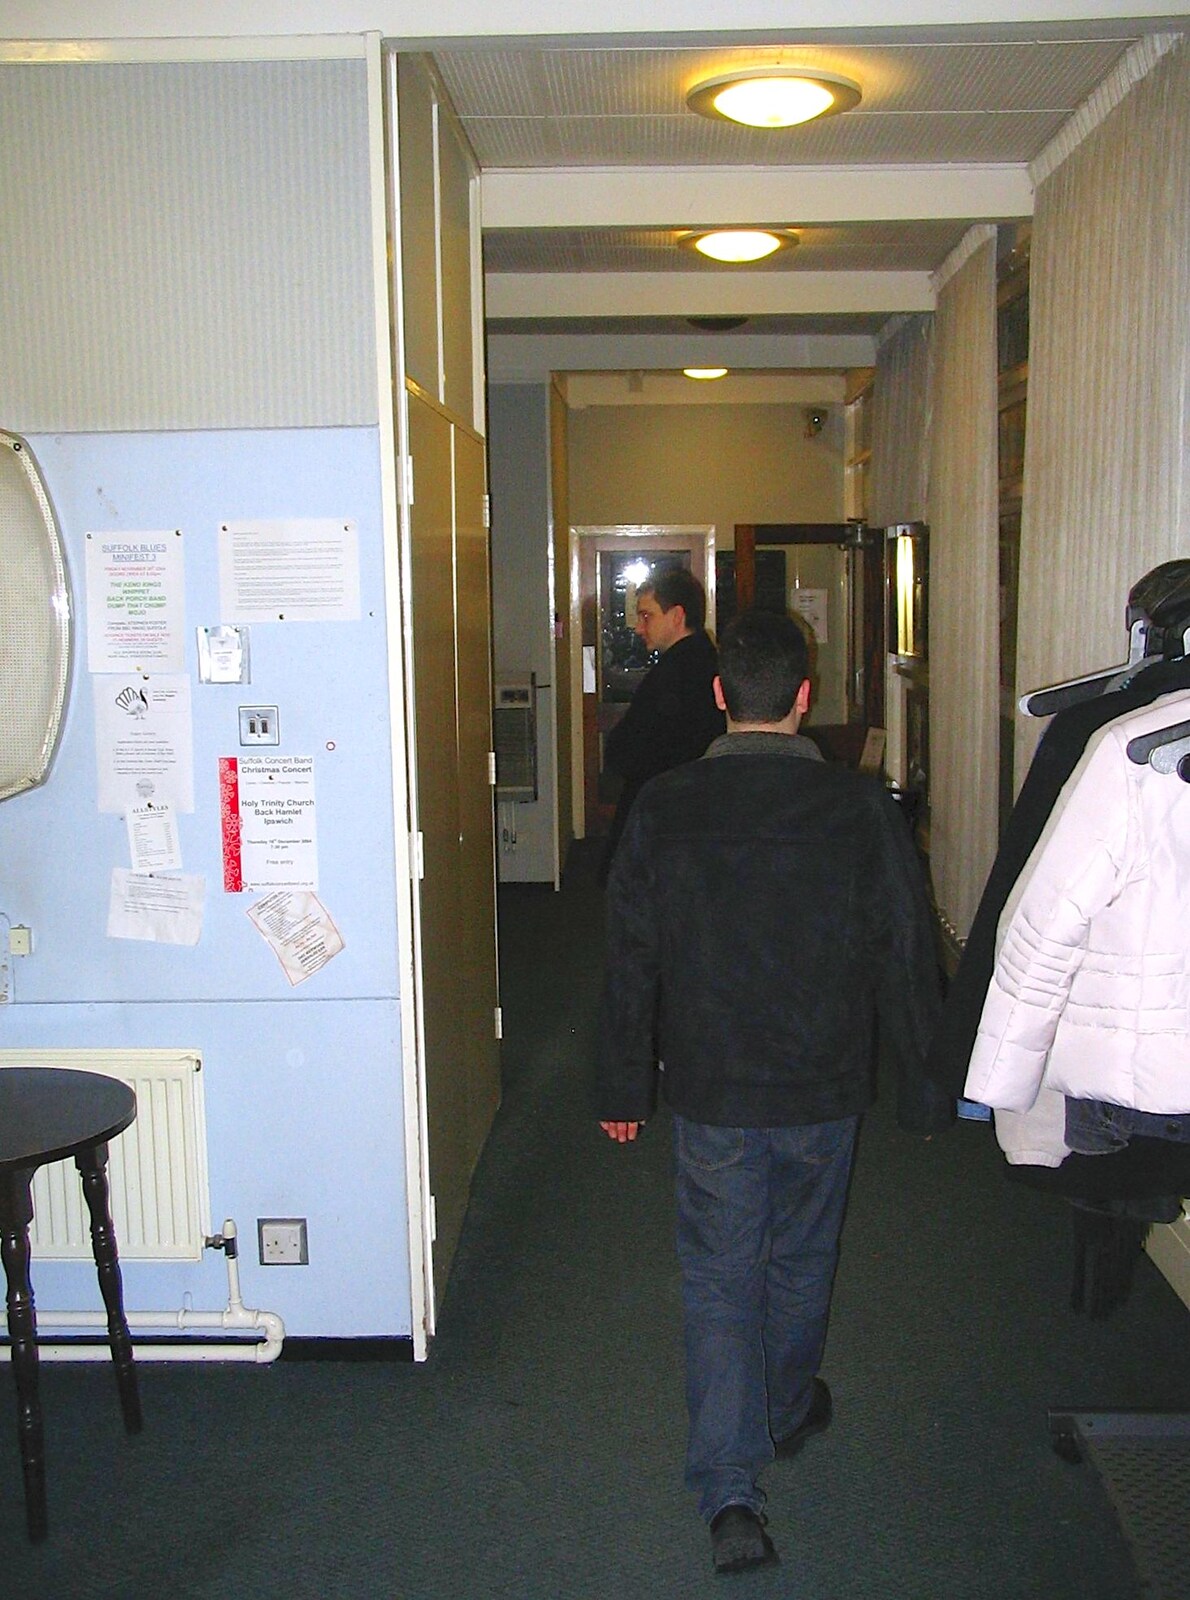 A CISU Blues Festival at the SCC Social Club, and a Million Laptops, Ipswich and Cambridge - 27th November 2004: The 'cloakroom' corridor on the way out